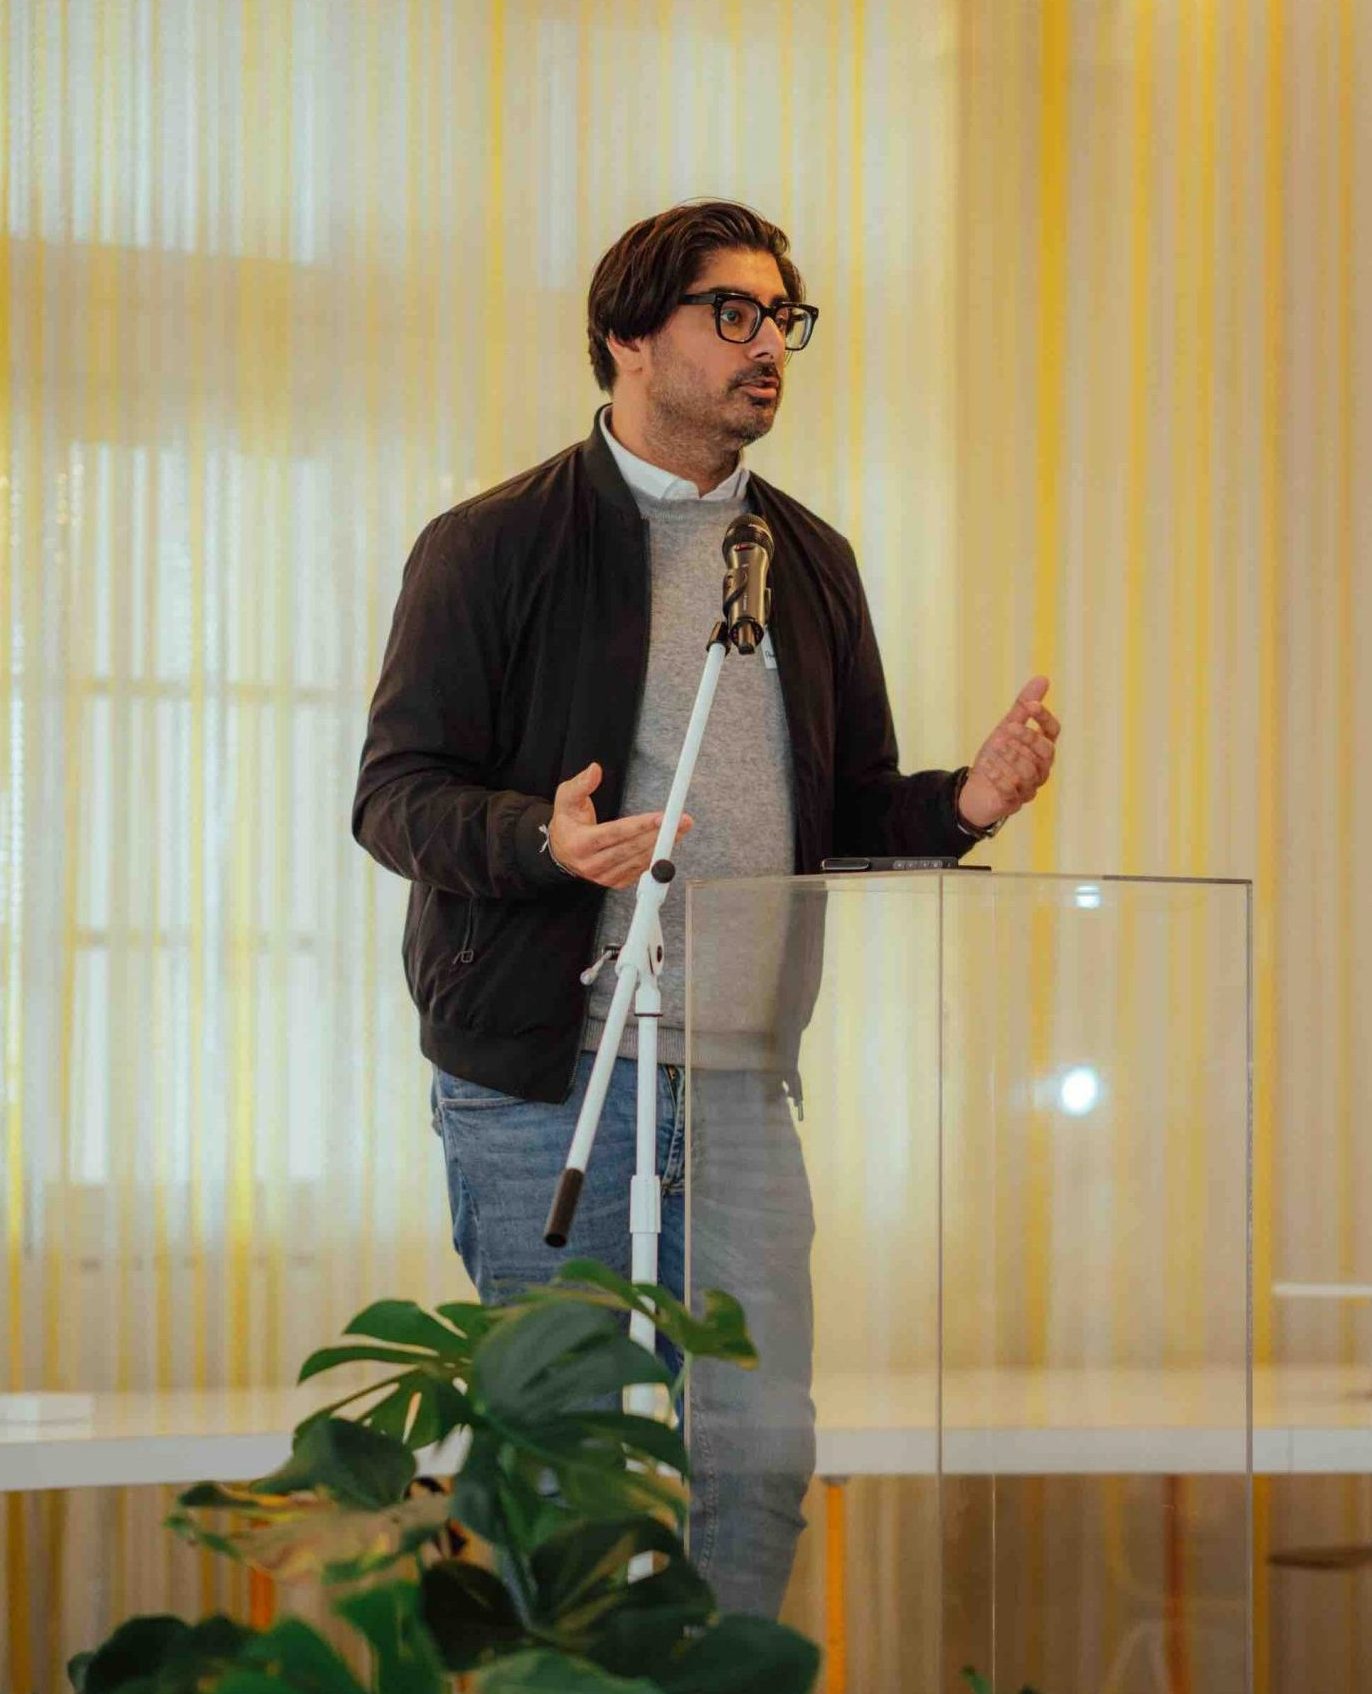 Pillars President Kashif Shaikh wearing a grey sweater, black bomber jacket, and jeans stands in front of a clear lucite podium speaking into a microphone